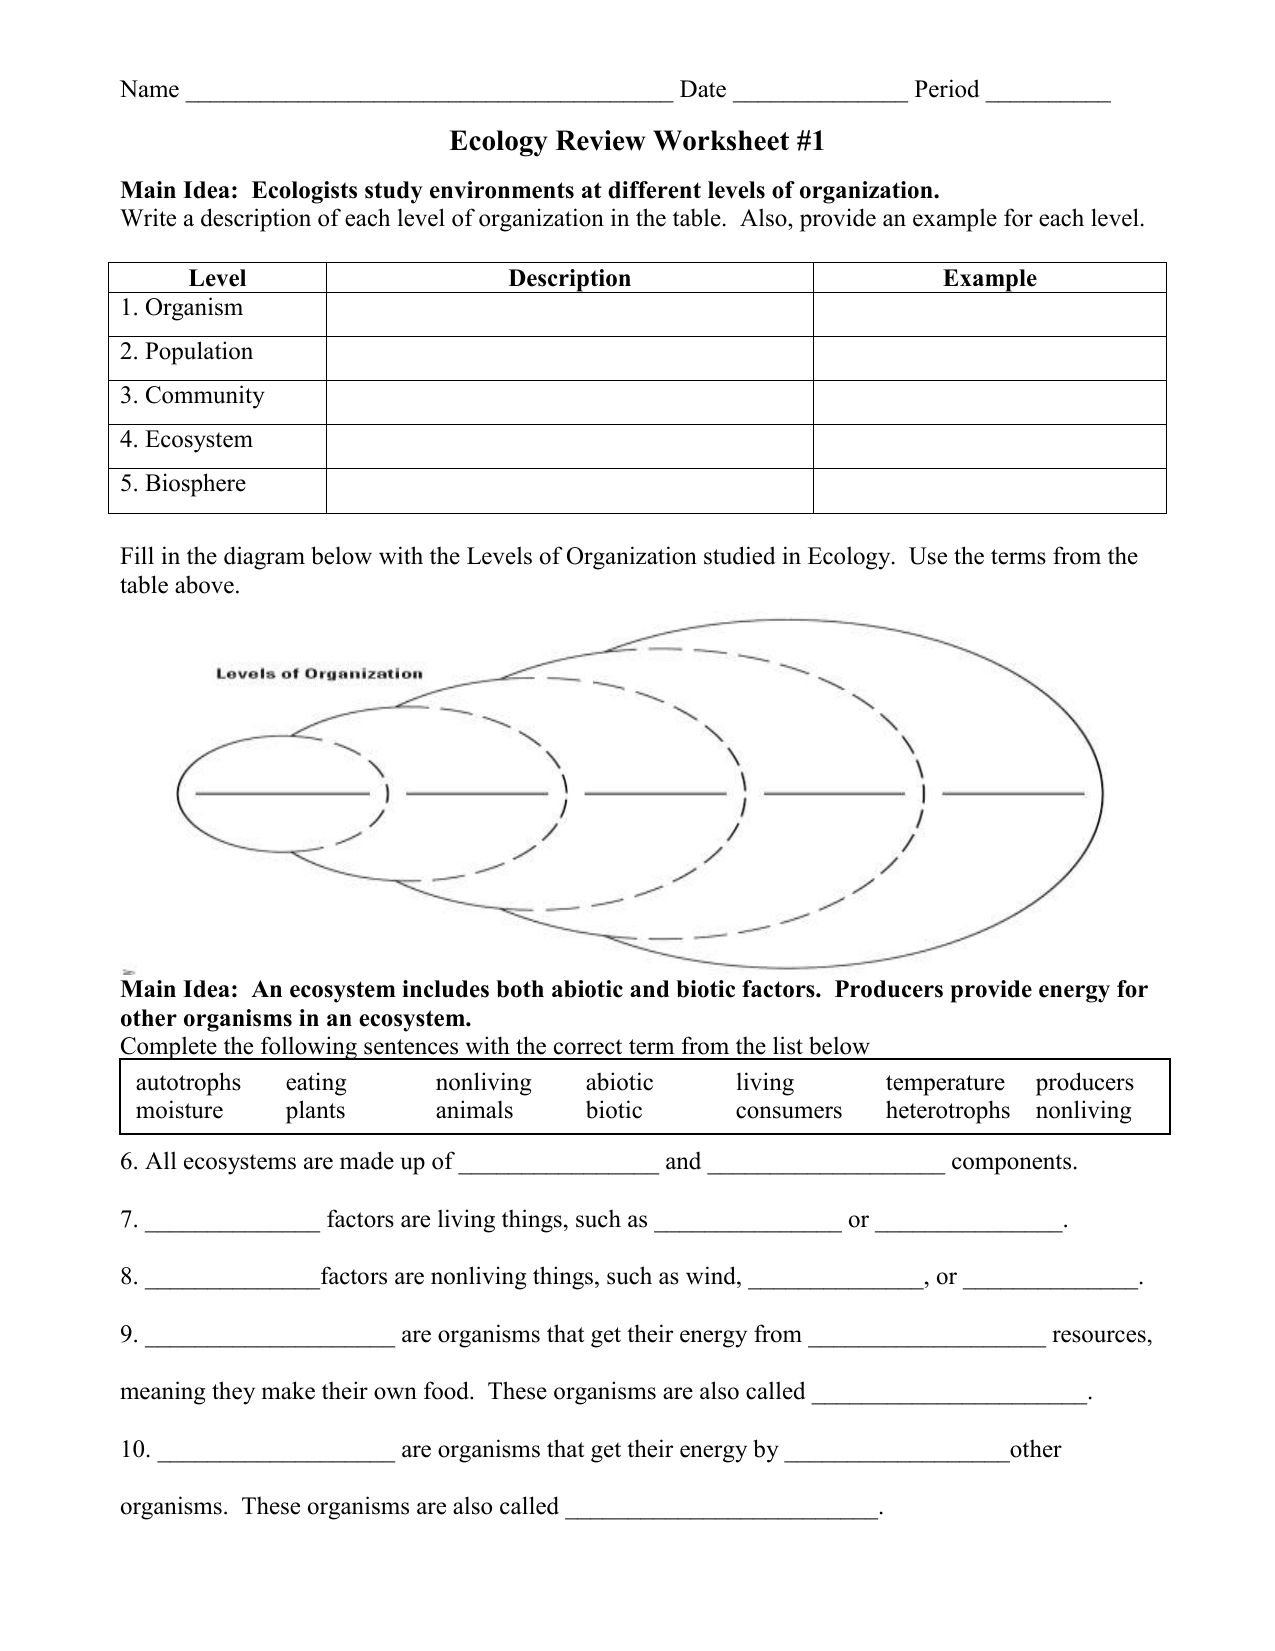 ecology-review-worksheet-2-first-wiring